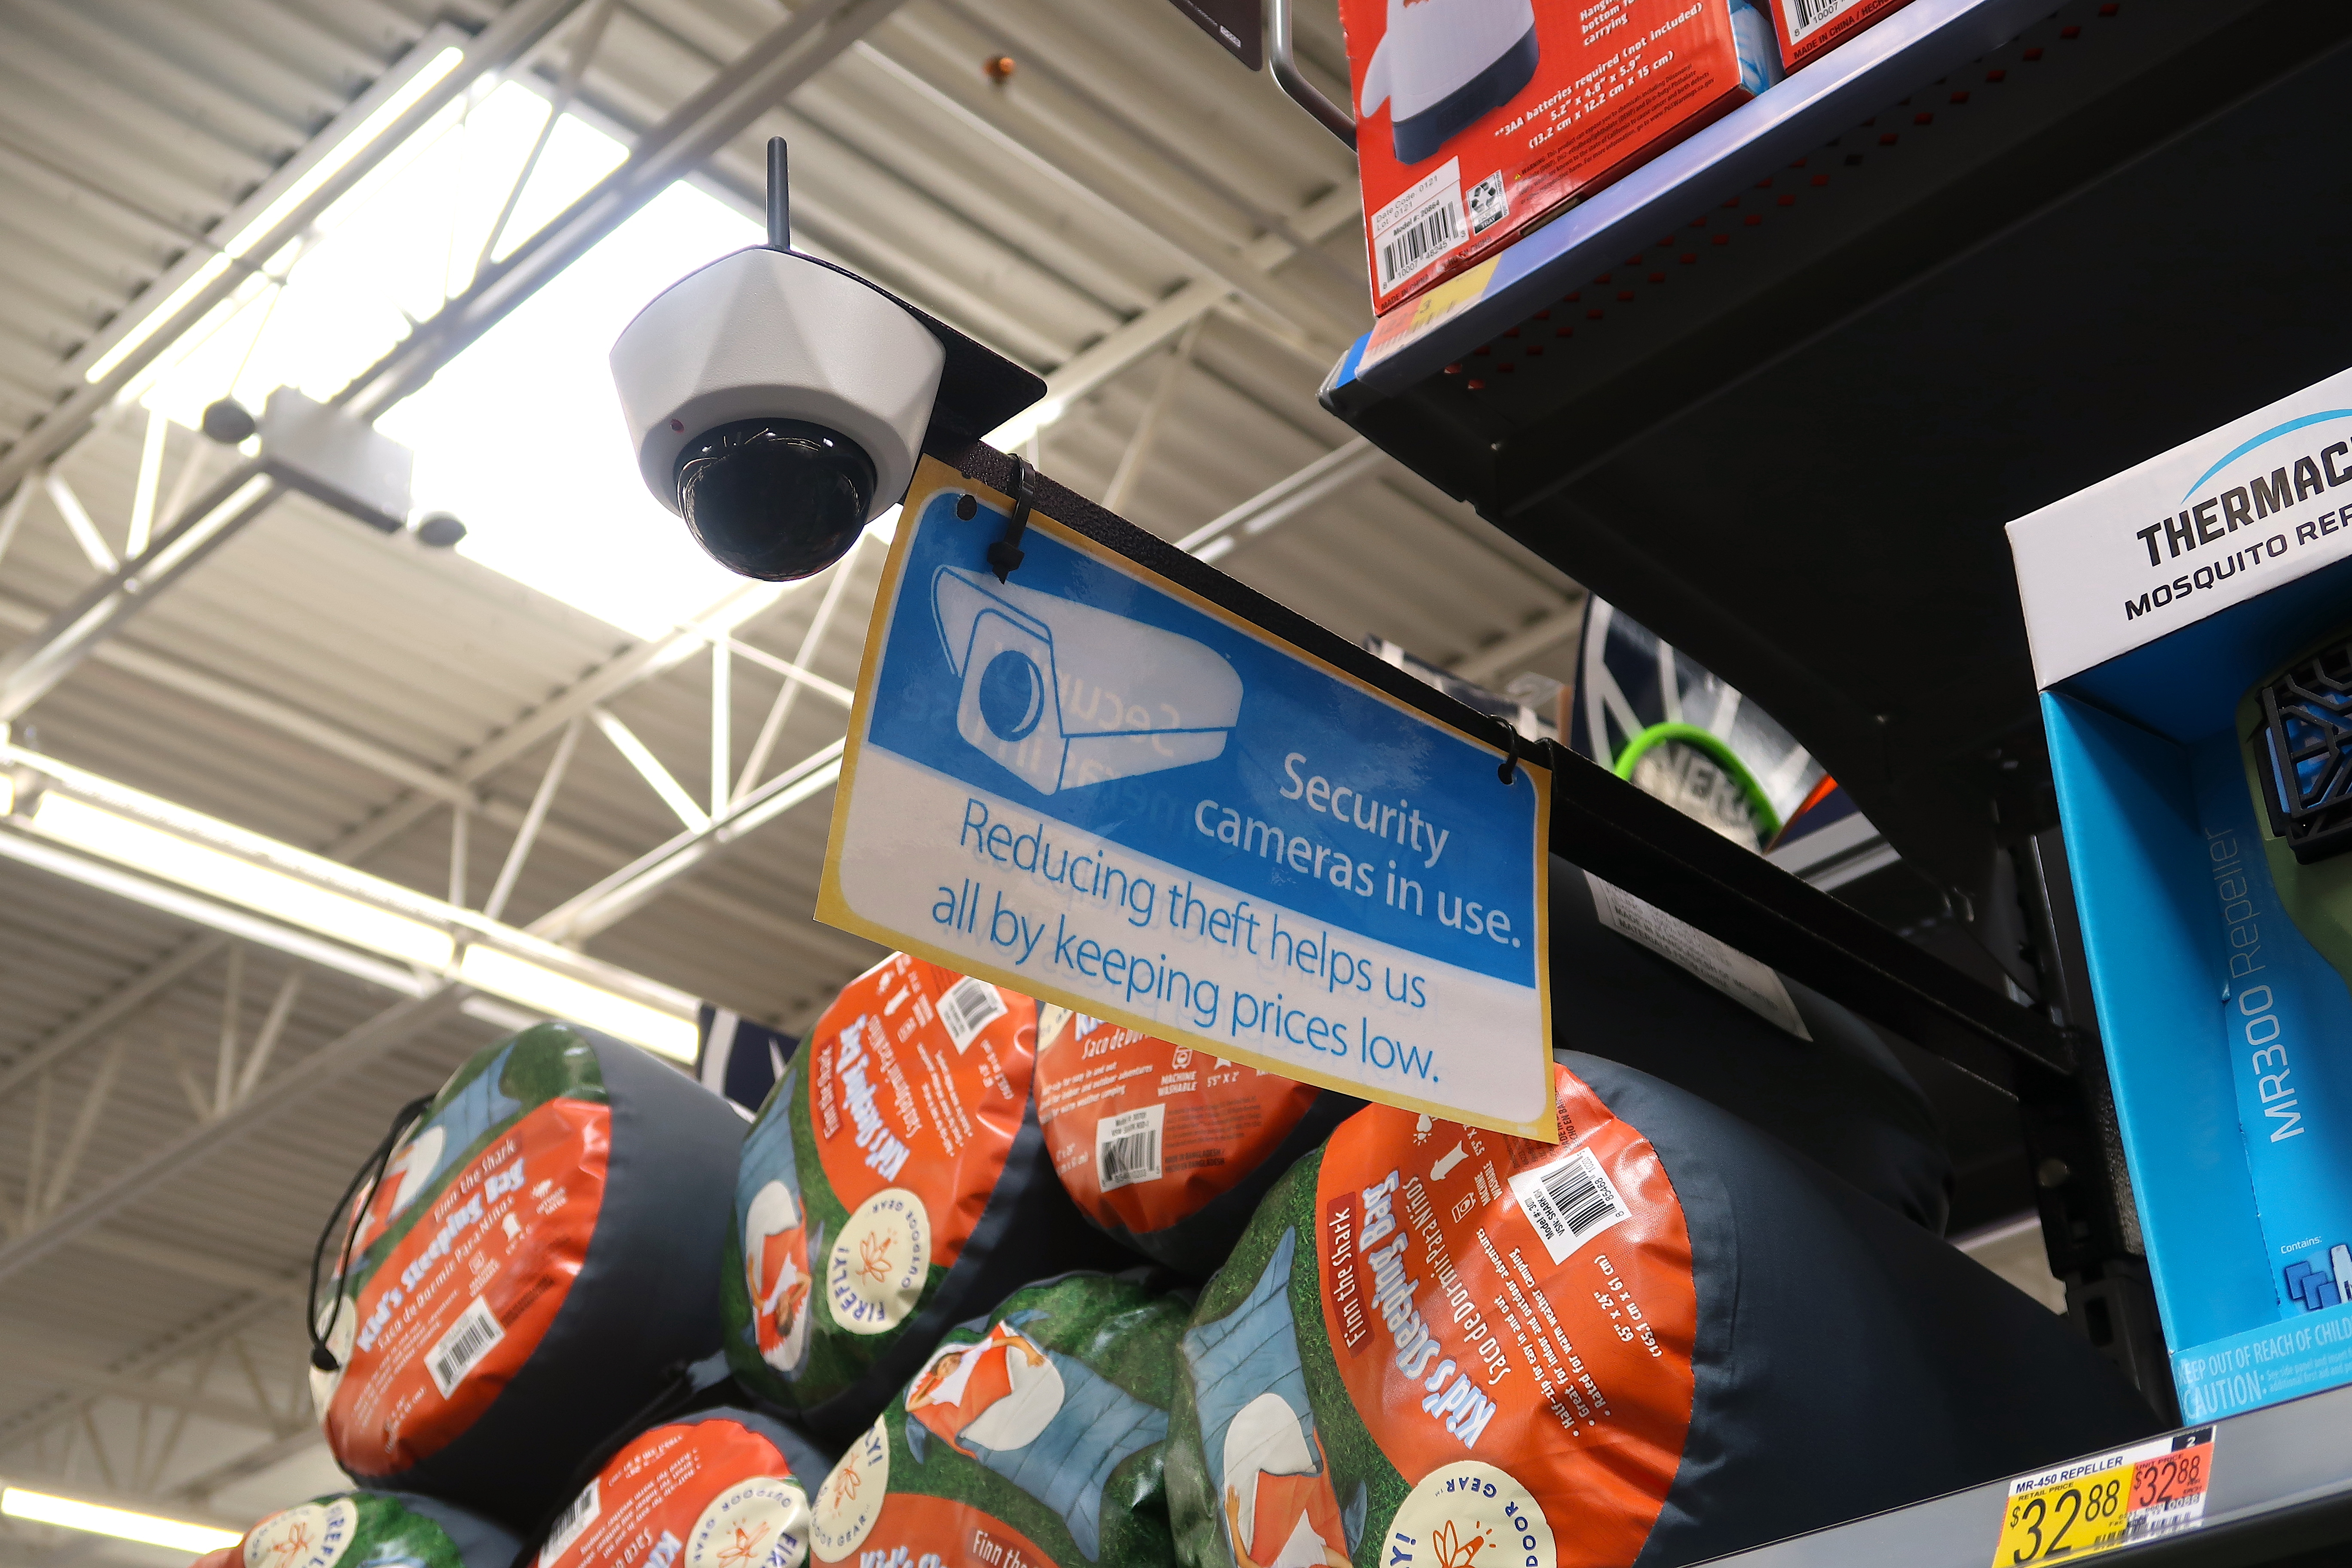 A security camera in a grocery store | Source: Shutterstock